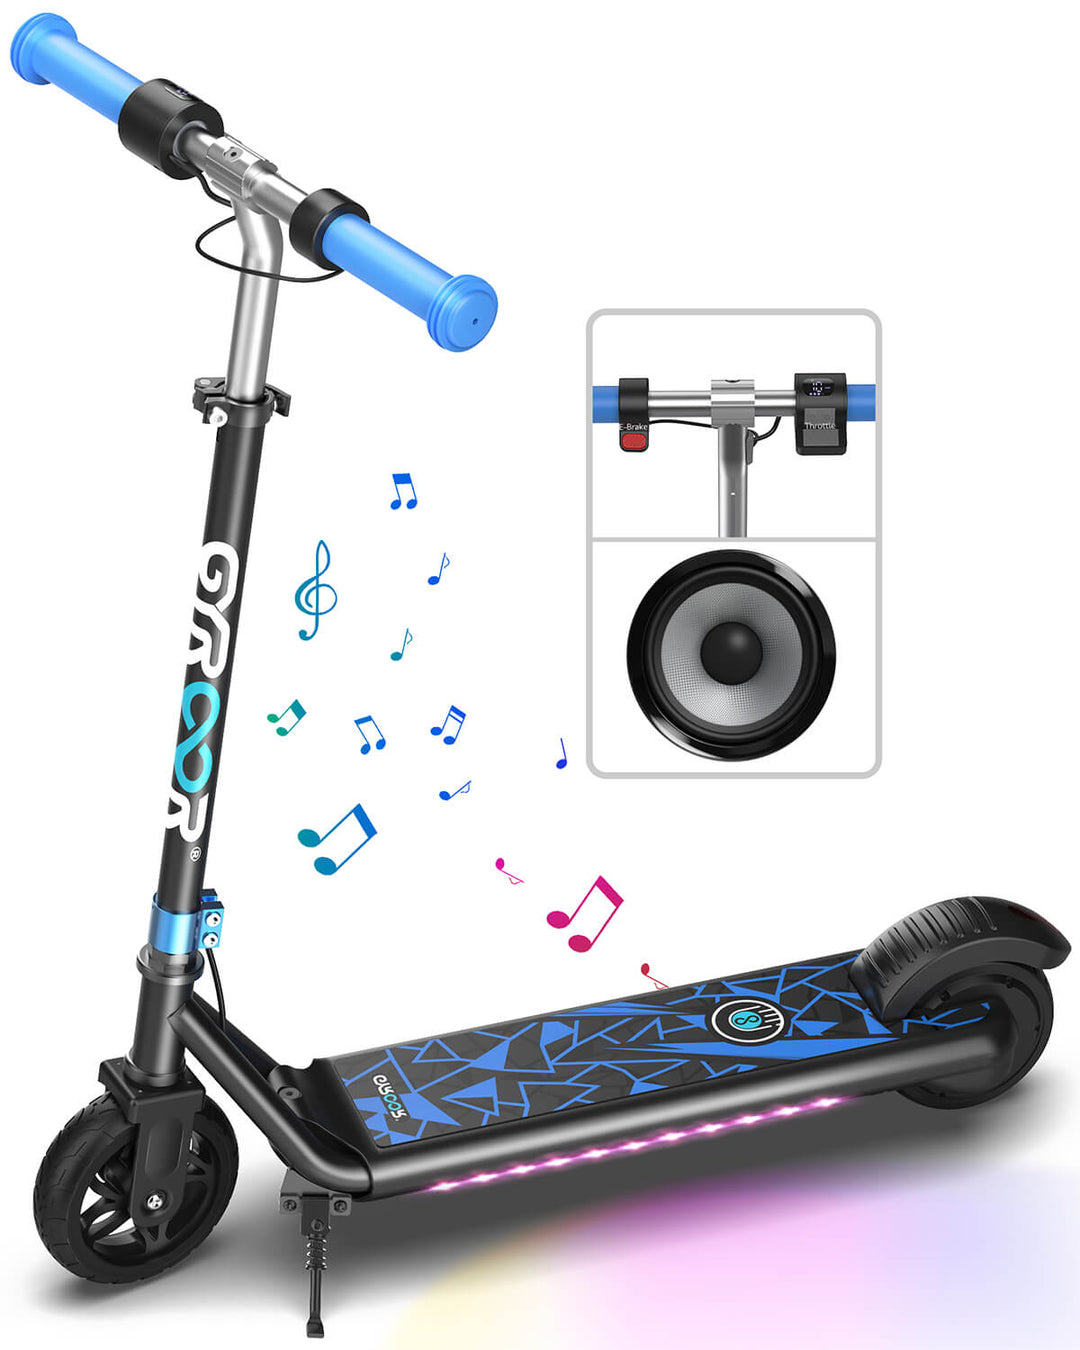 Gyroor H30 Max electric scooter - best electric scooter for kids ages 6-12 blue